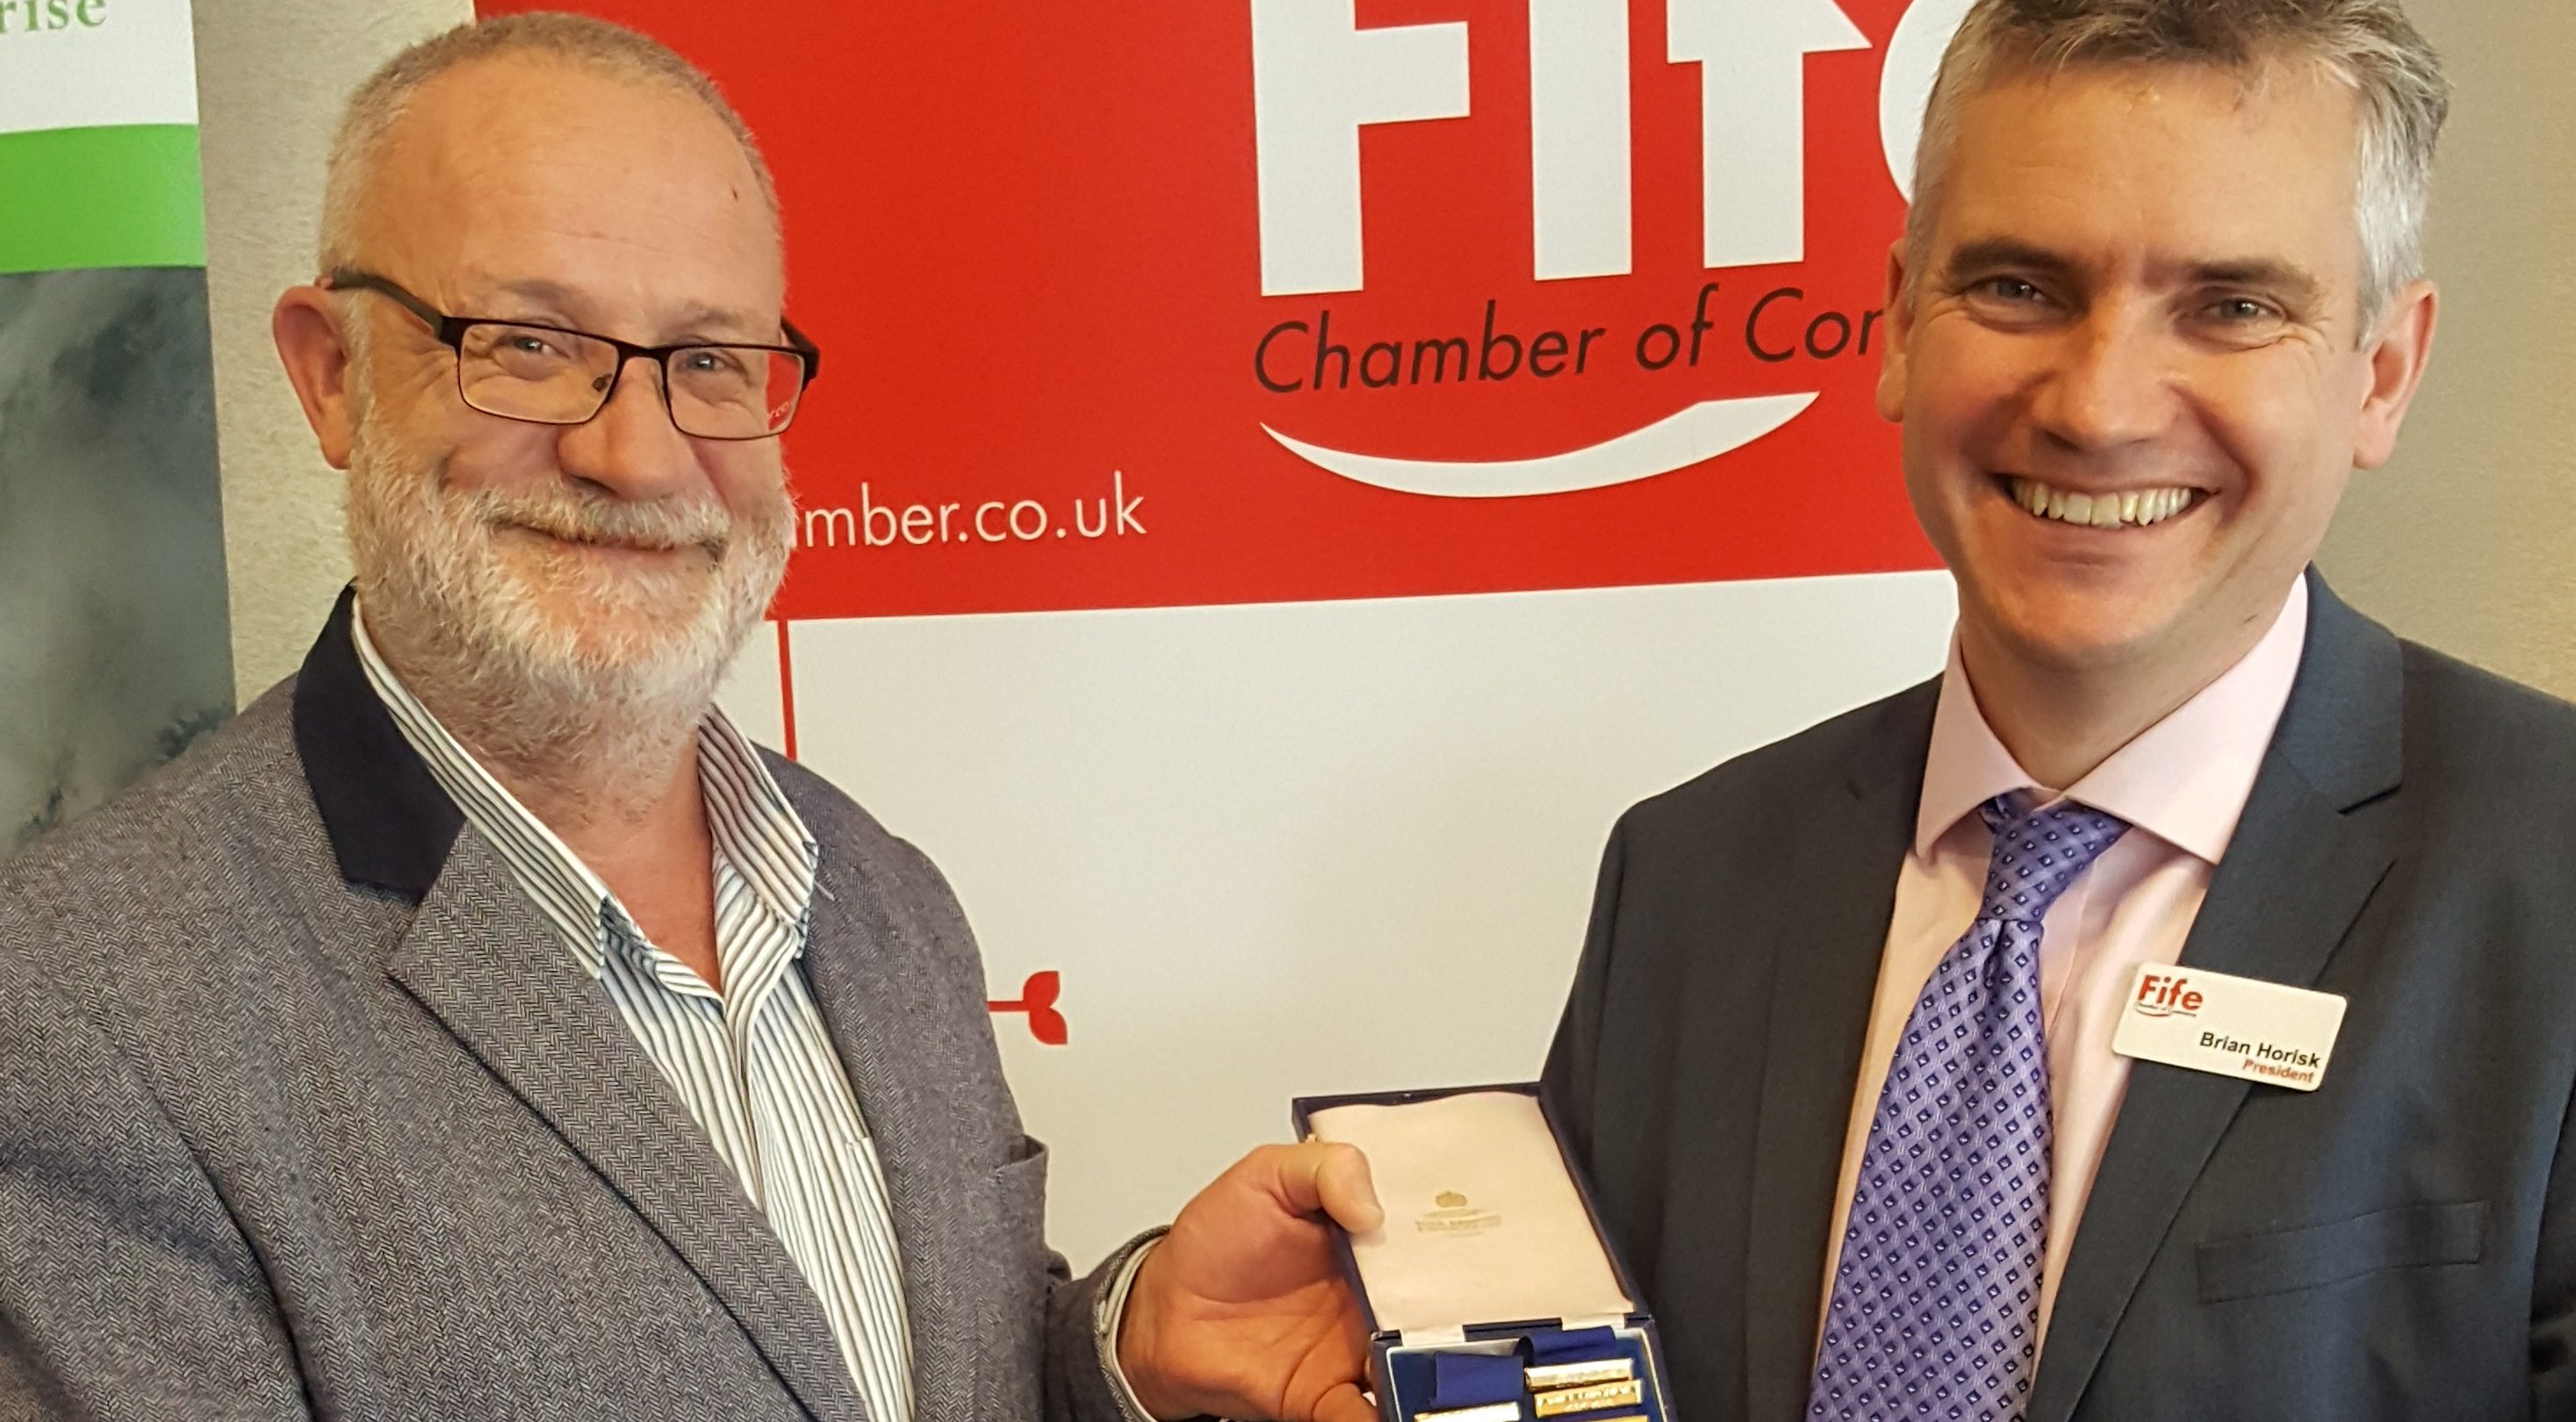 Peter Southcott congratulating Brian Horisk on his appointment to the role of President of Fife Chamber of Commerce